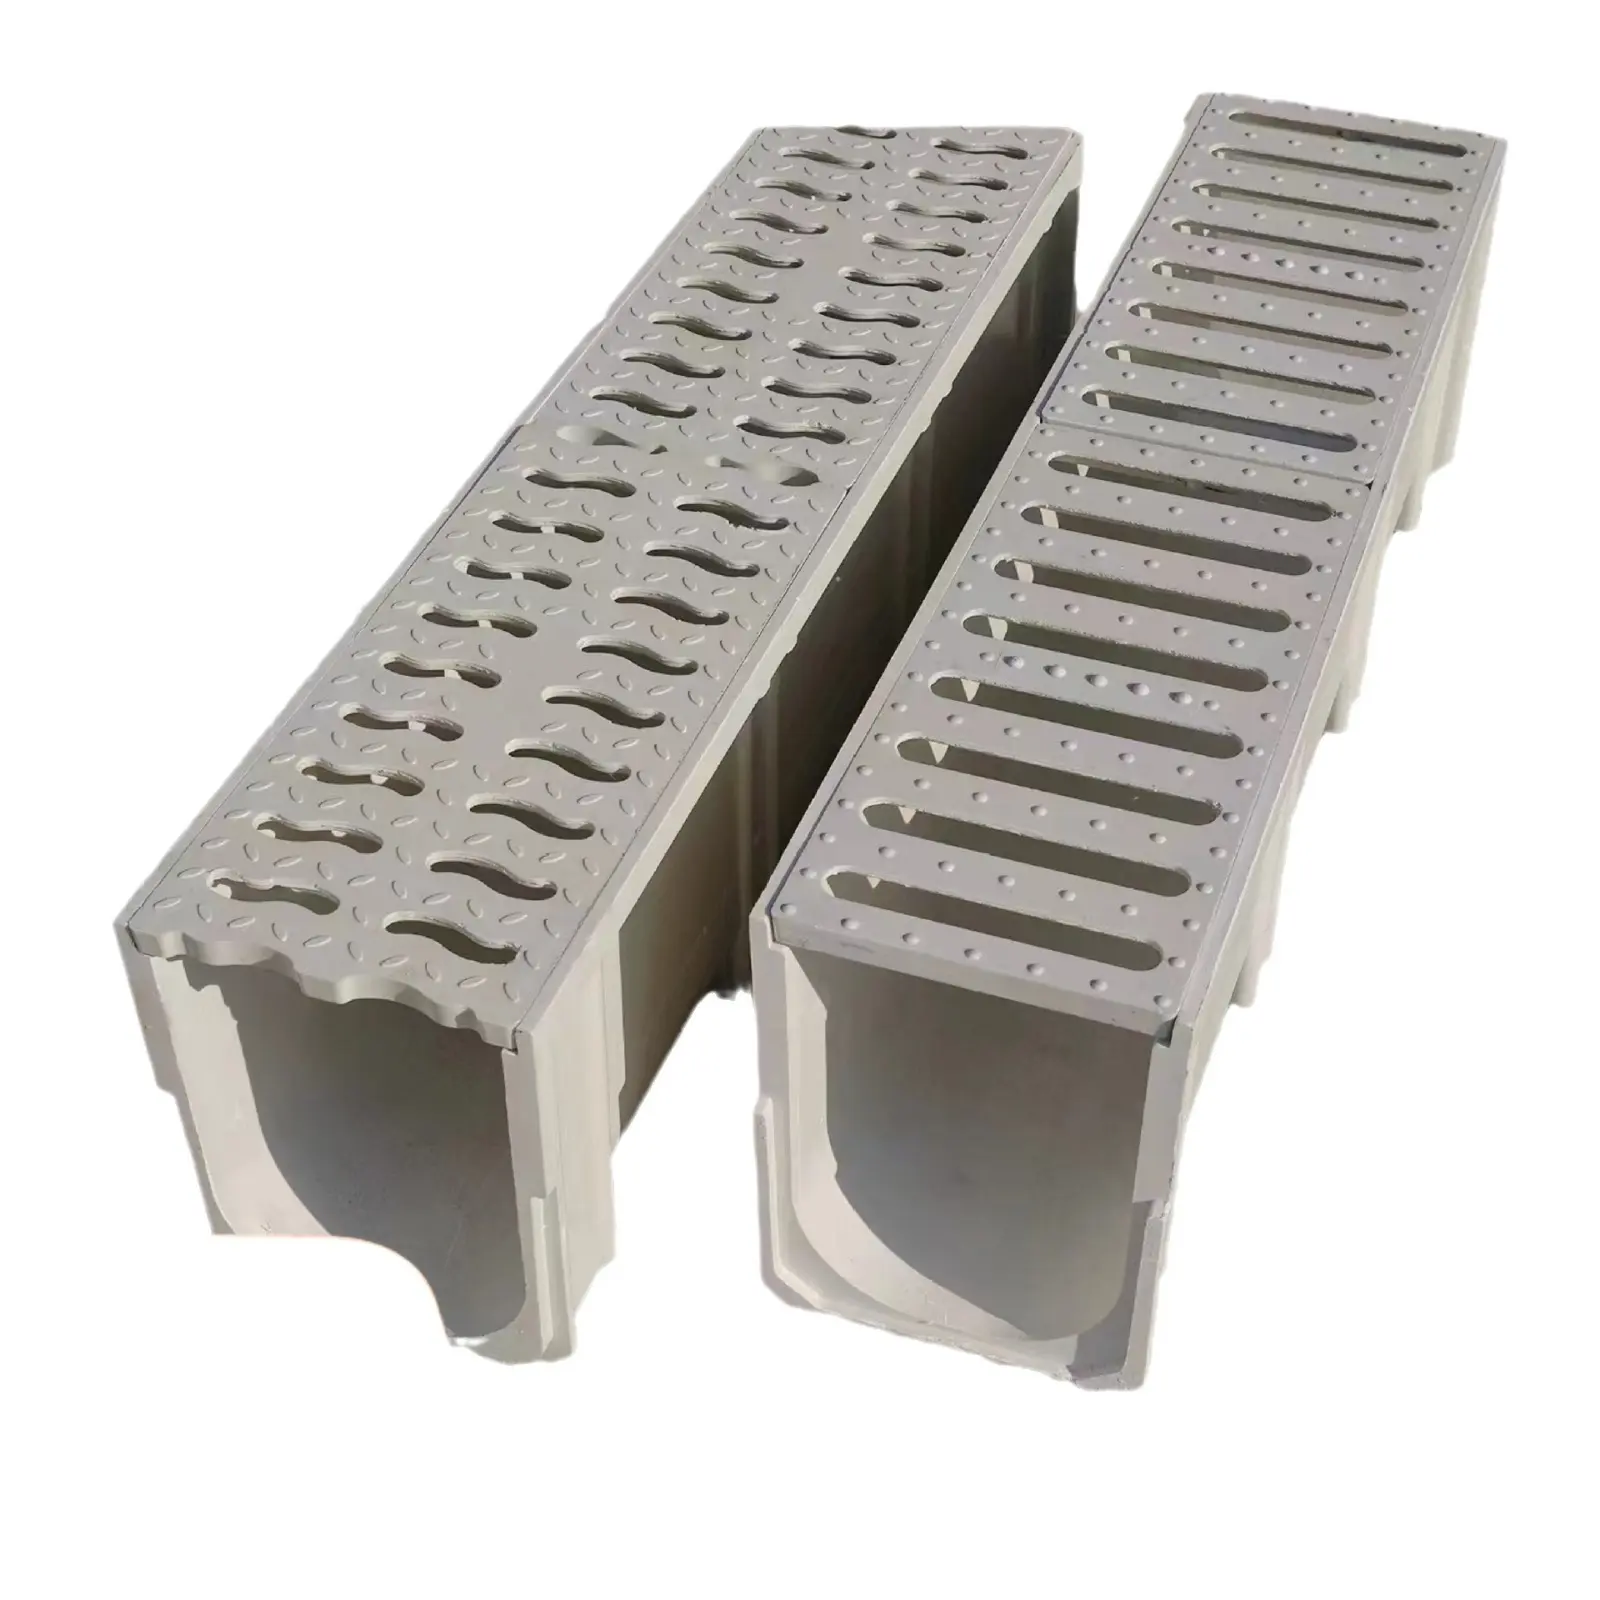 OEM and ODM resin drainage concrete channels construction material composite drainage channel